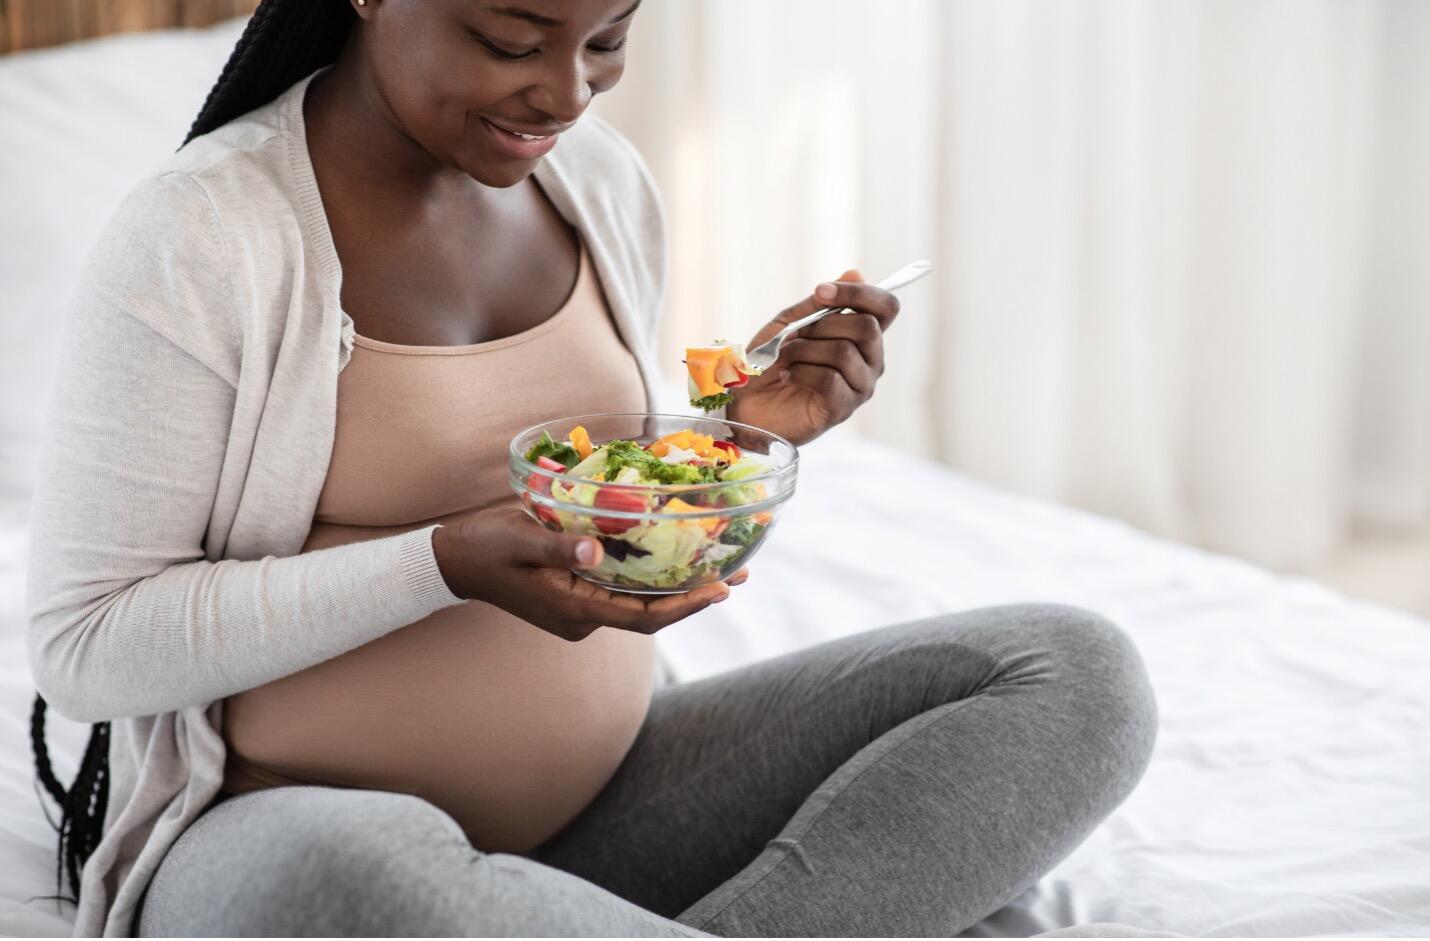 PREGNANT WOMAN SITTING ON BED